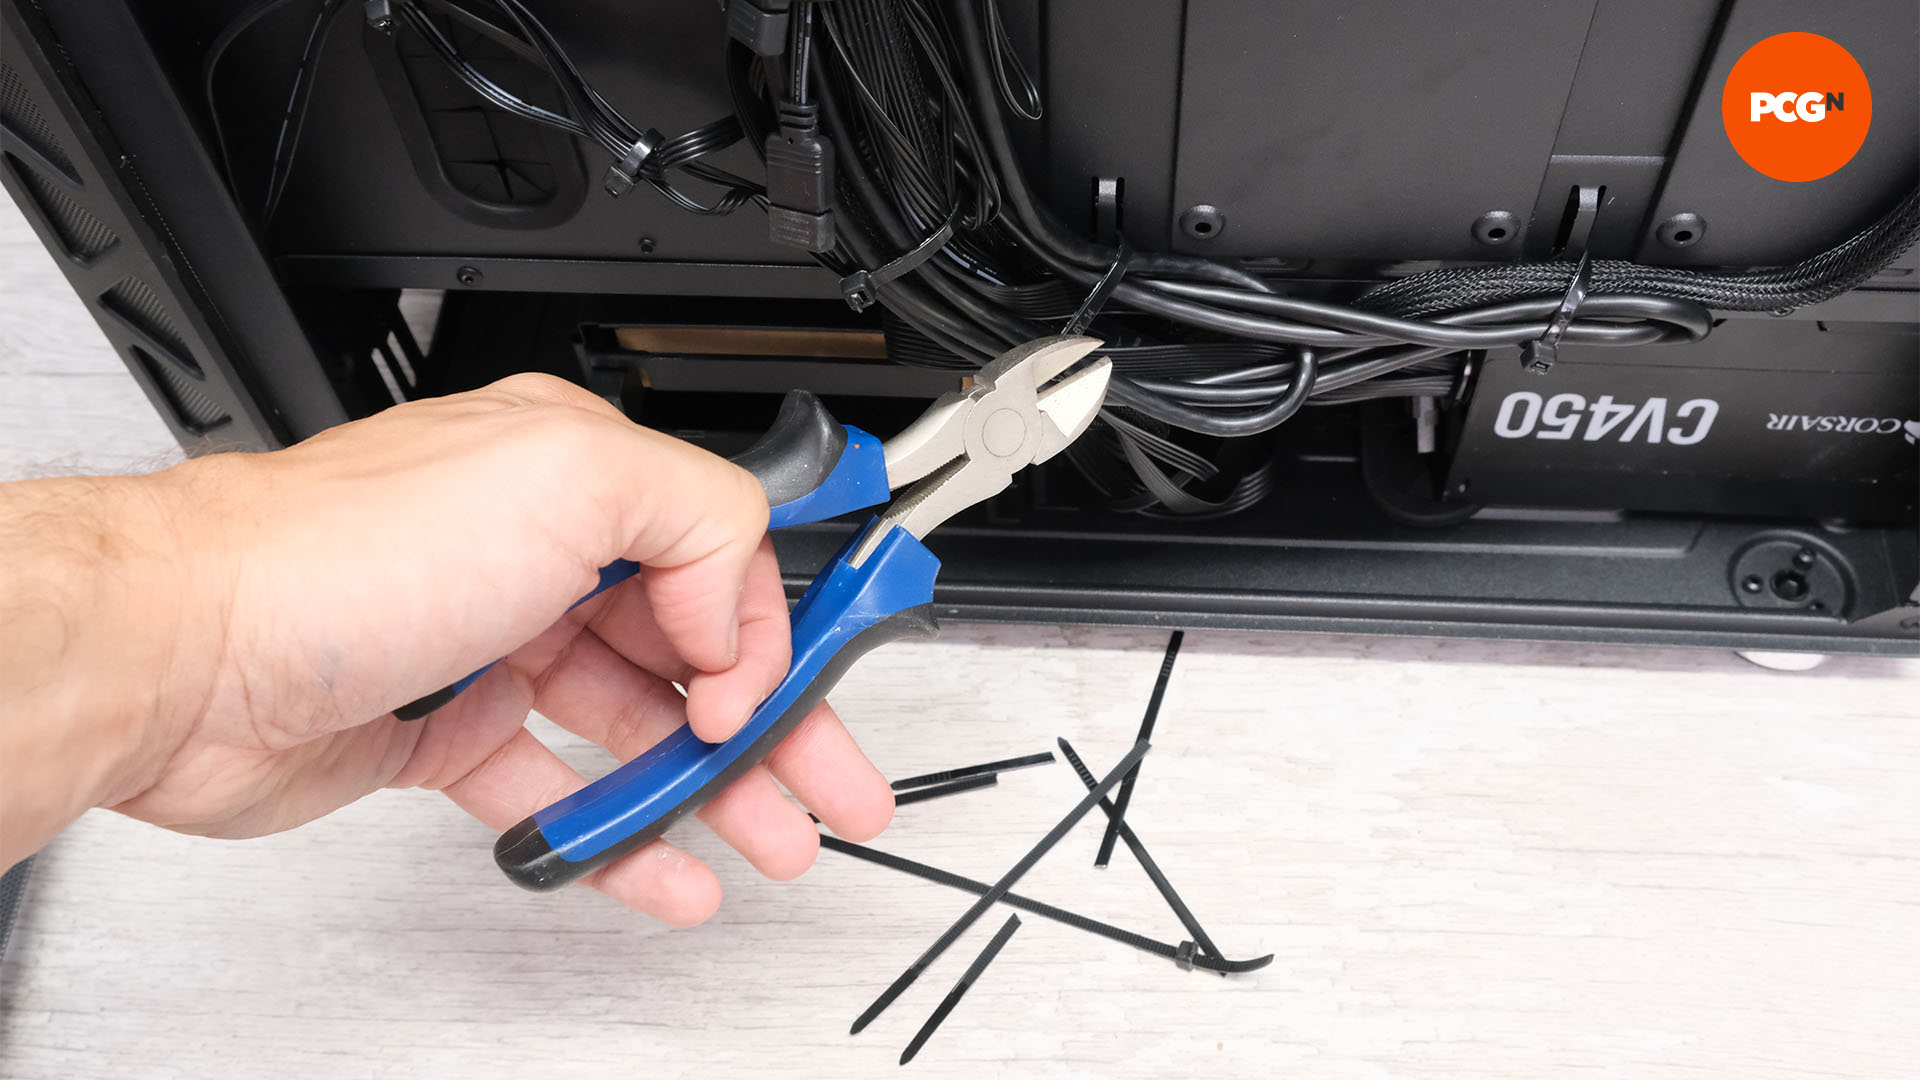 How to build a gaming PC: Snip the ends off the cable ties with some side cutters